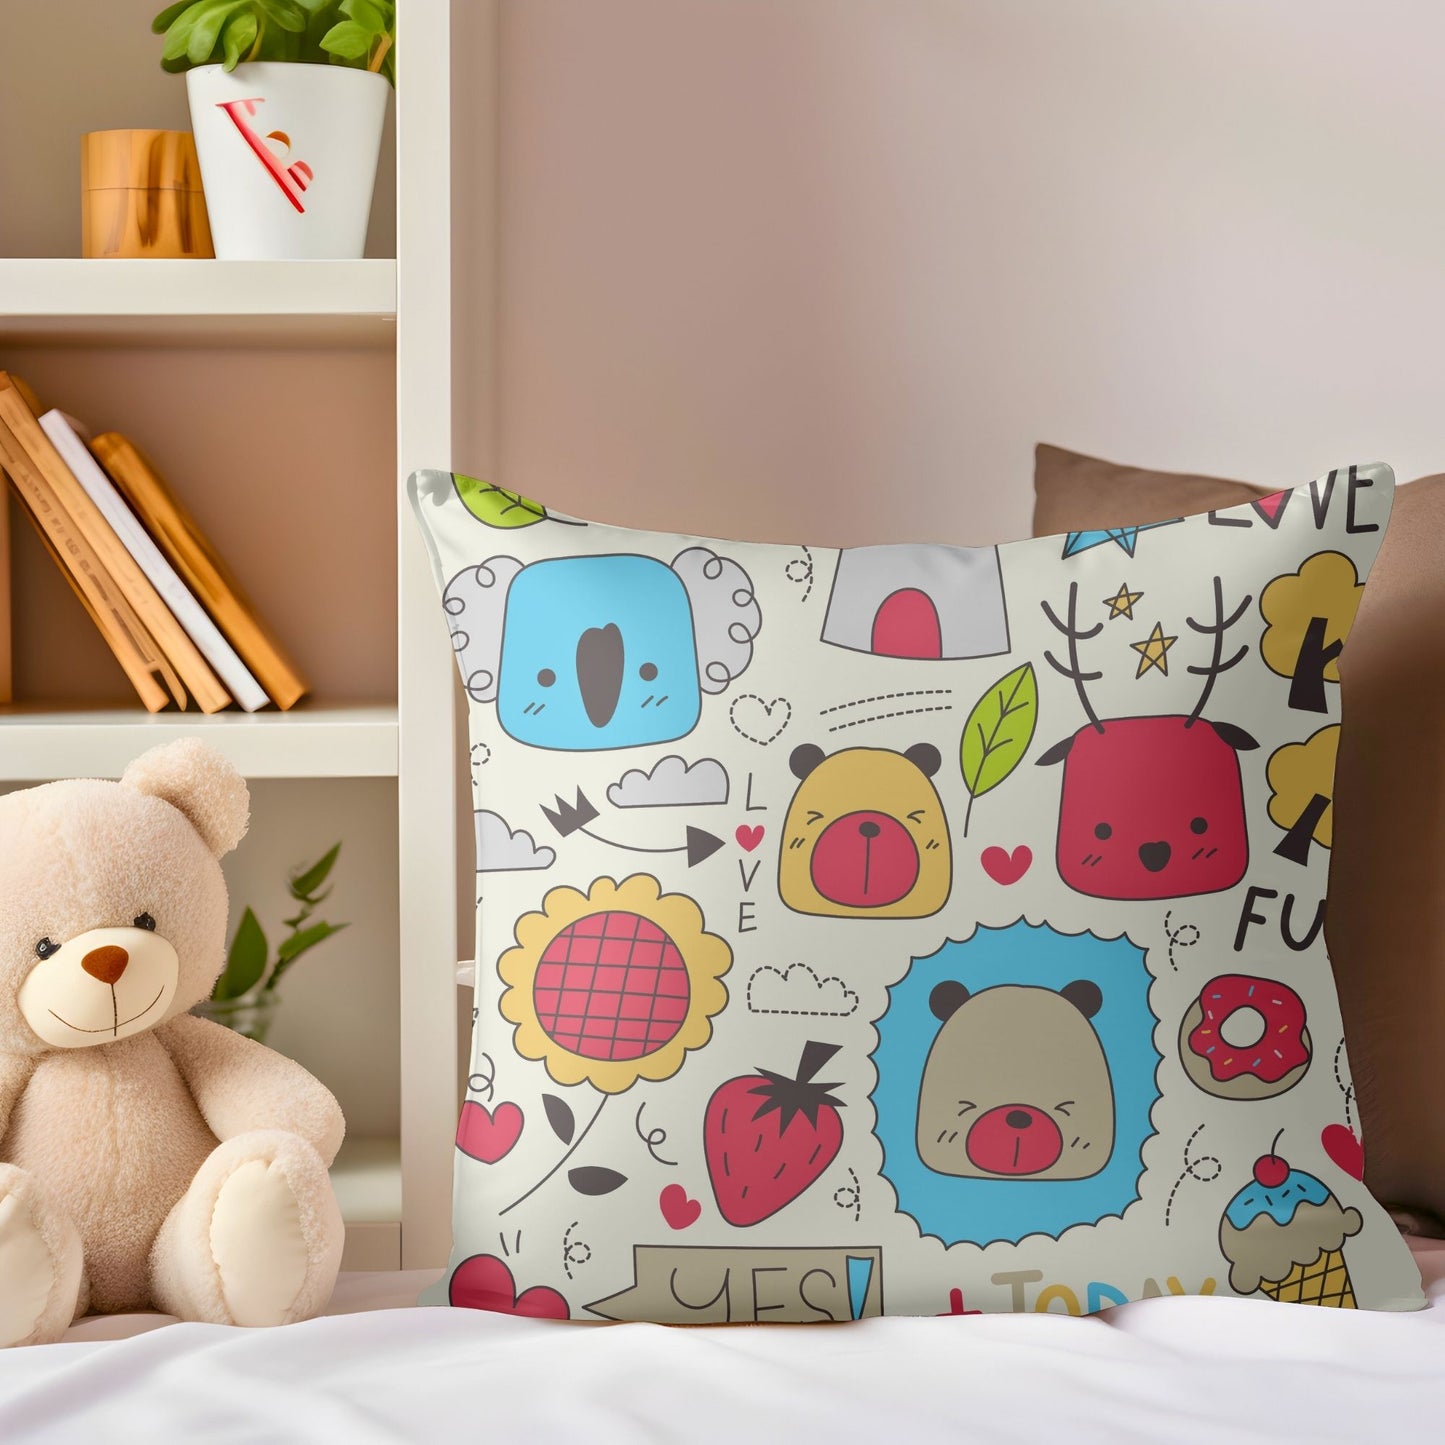 Kids pillow featuring a cute animal pattern for playful dreams.